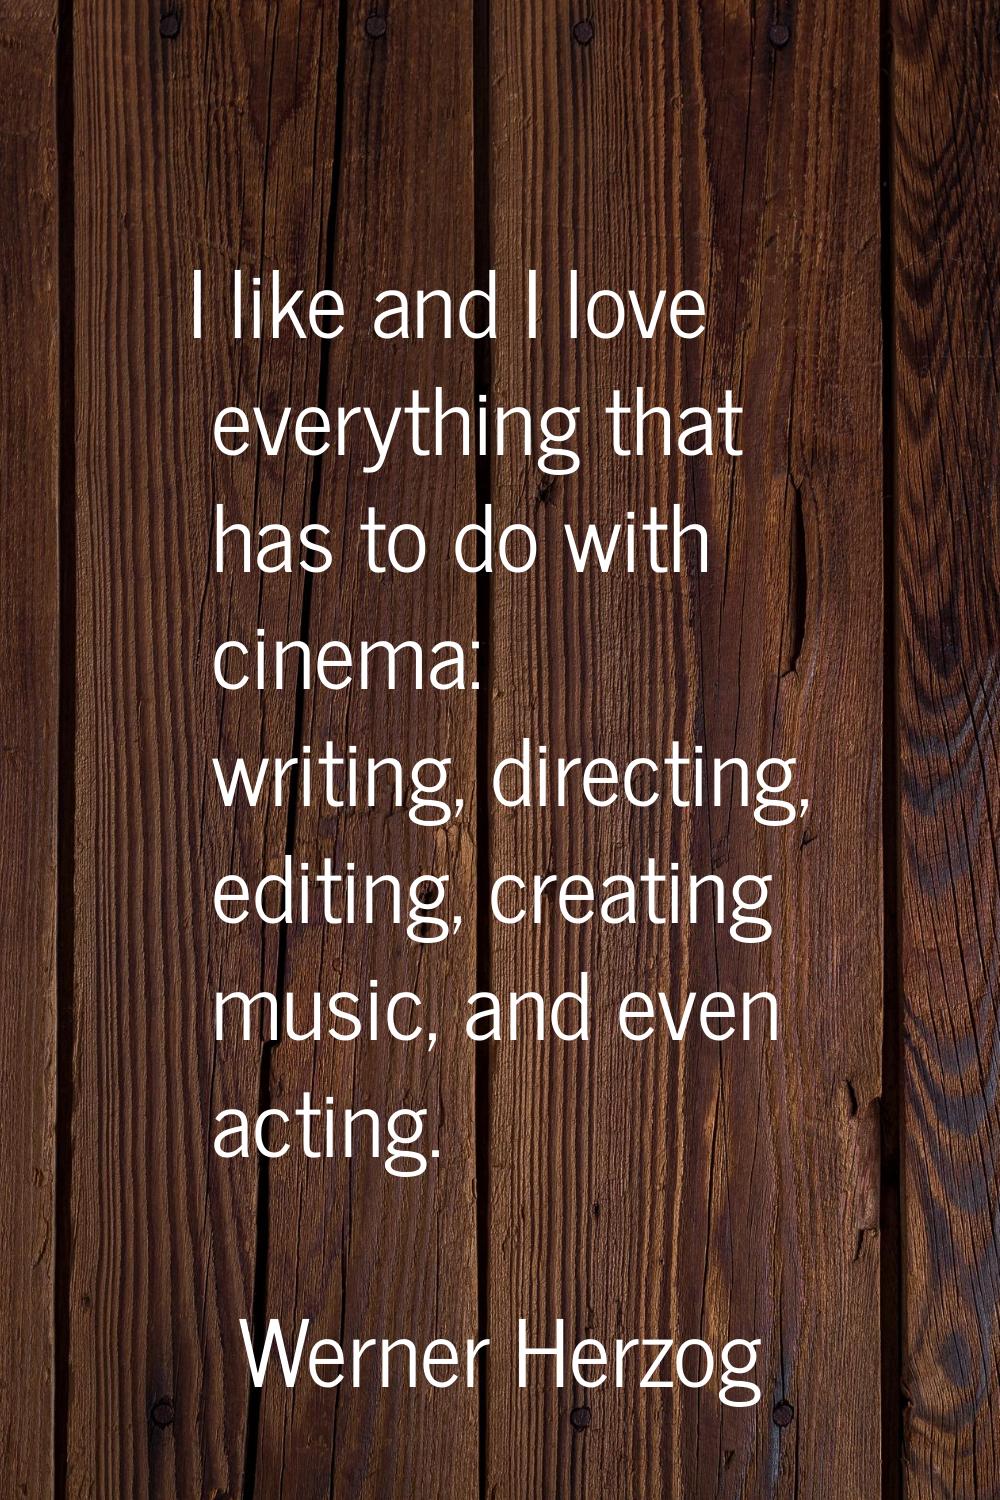 I like and I love everything that has to do with cinema: writing, directing, editing, creating musi